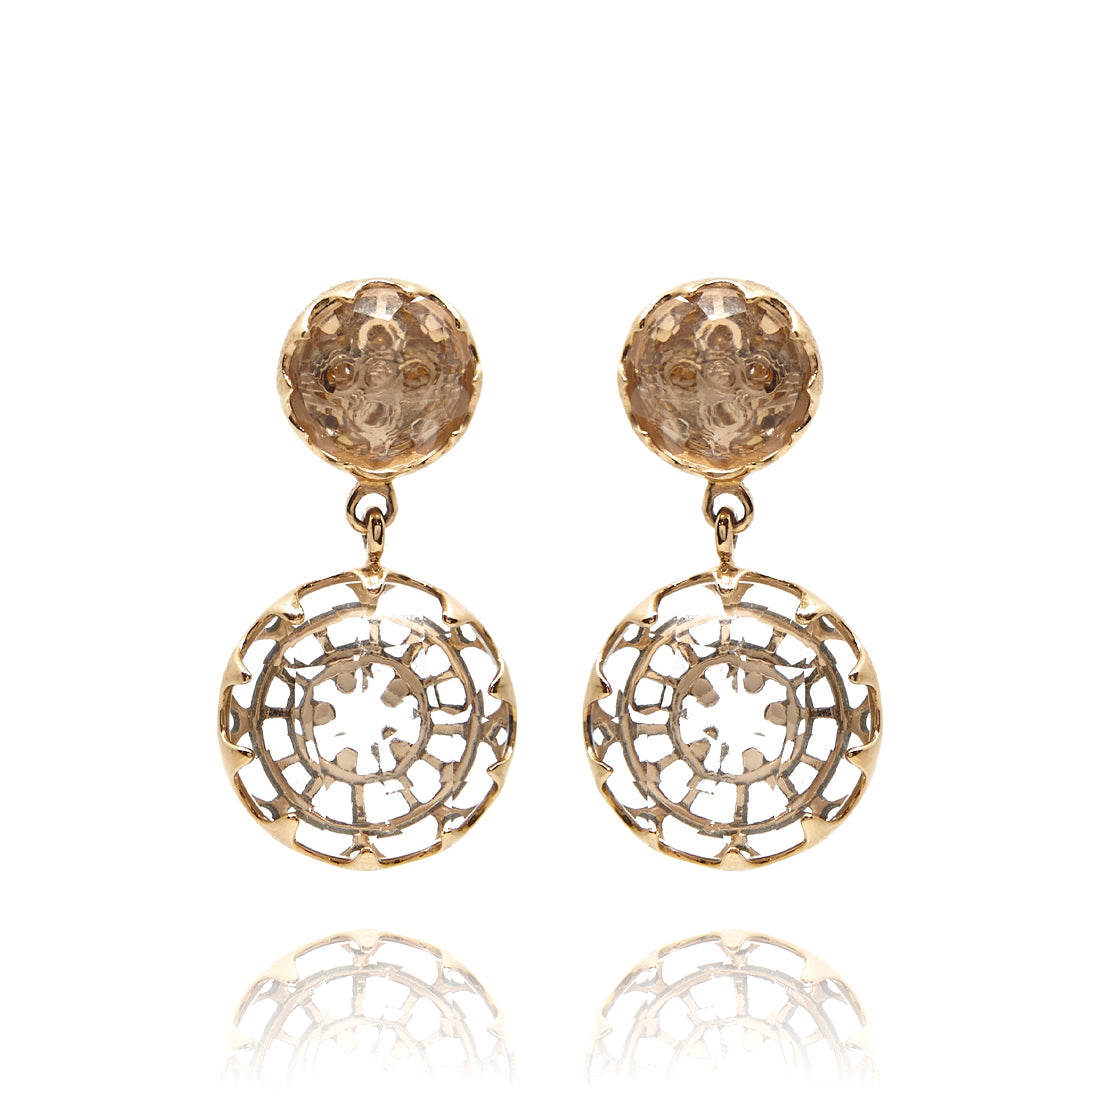 Rose gold earrings with rock crystal